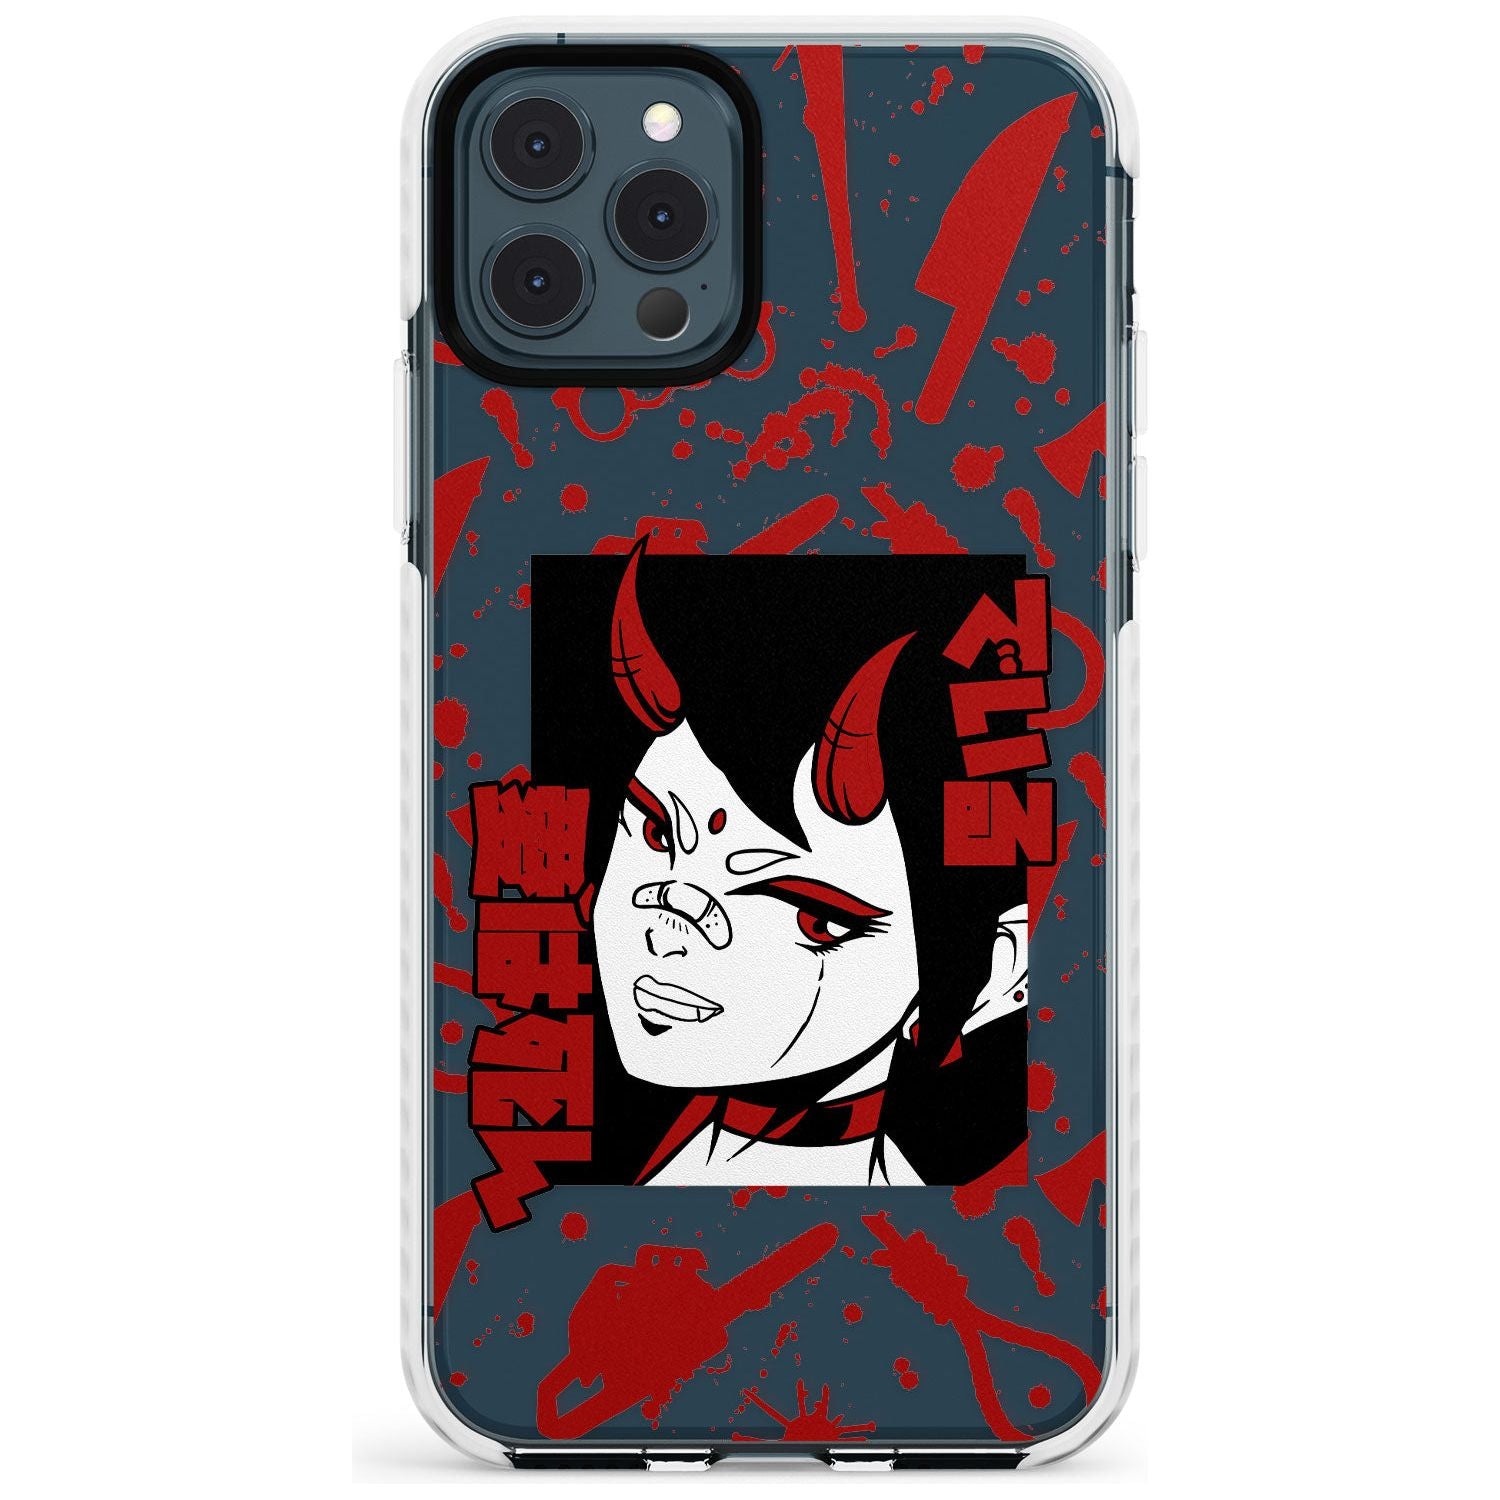 She's a Devil Impact Phone Case for iPhone 11 Pro Max